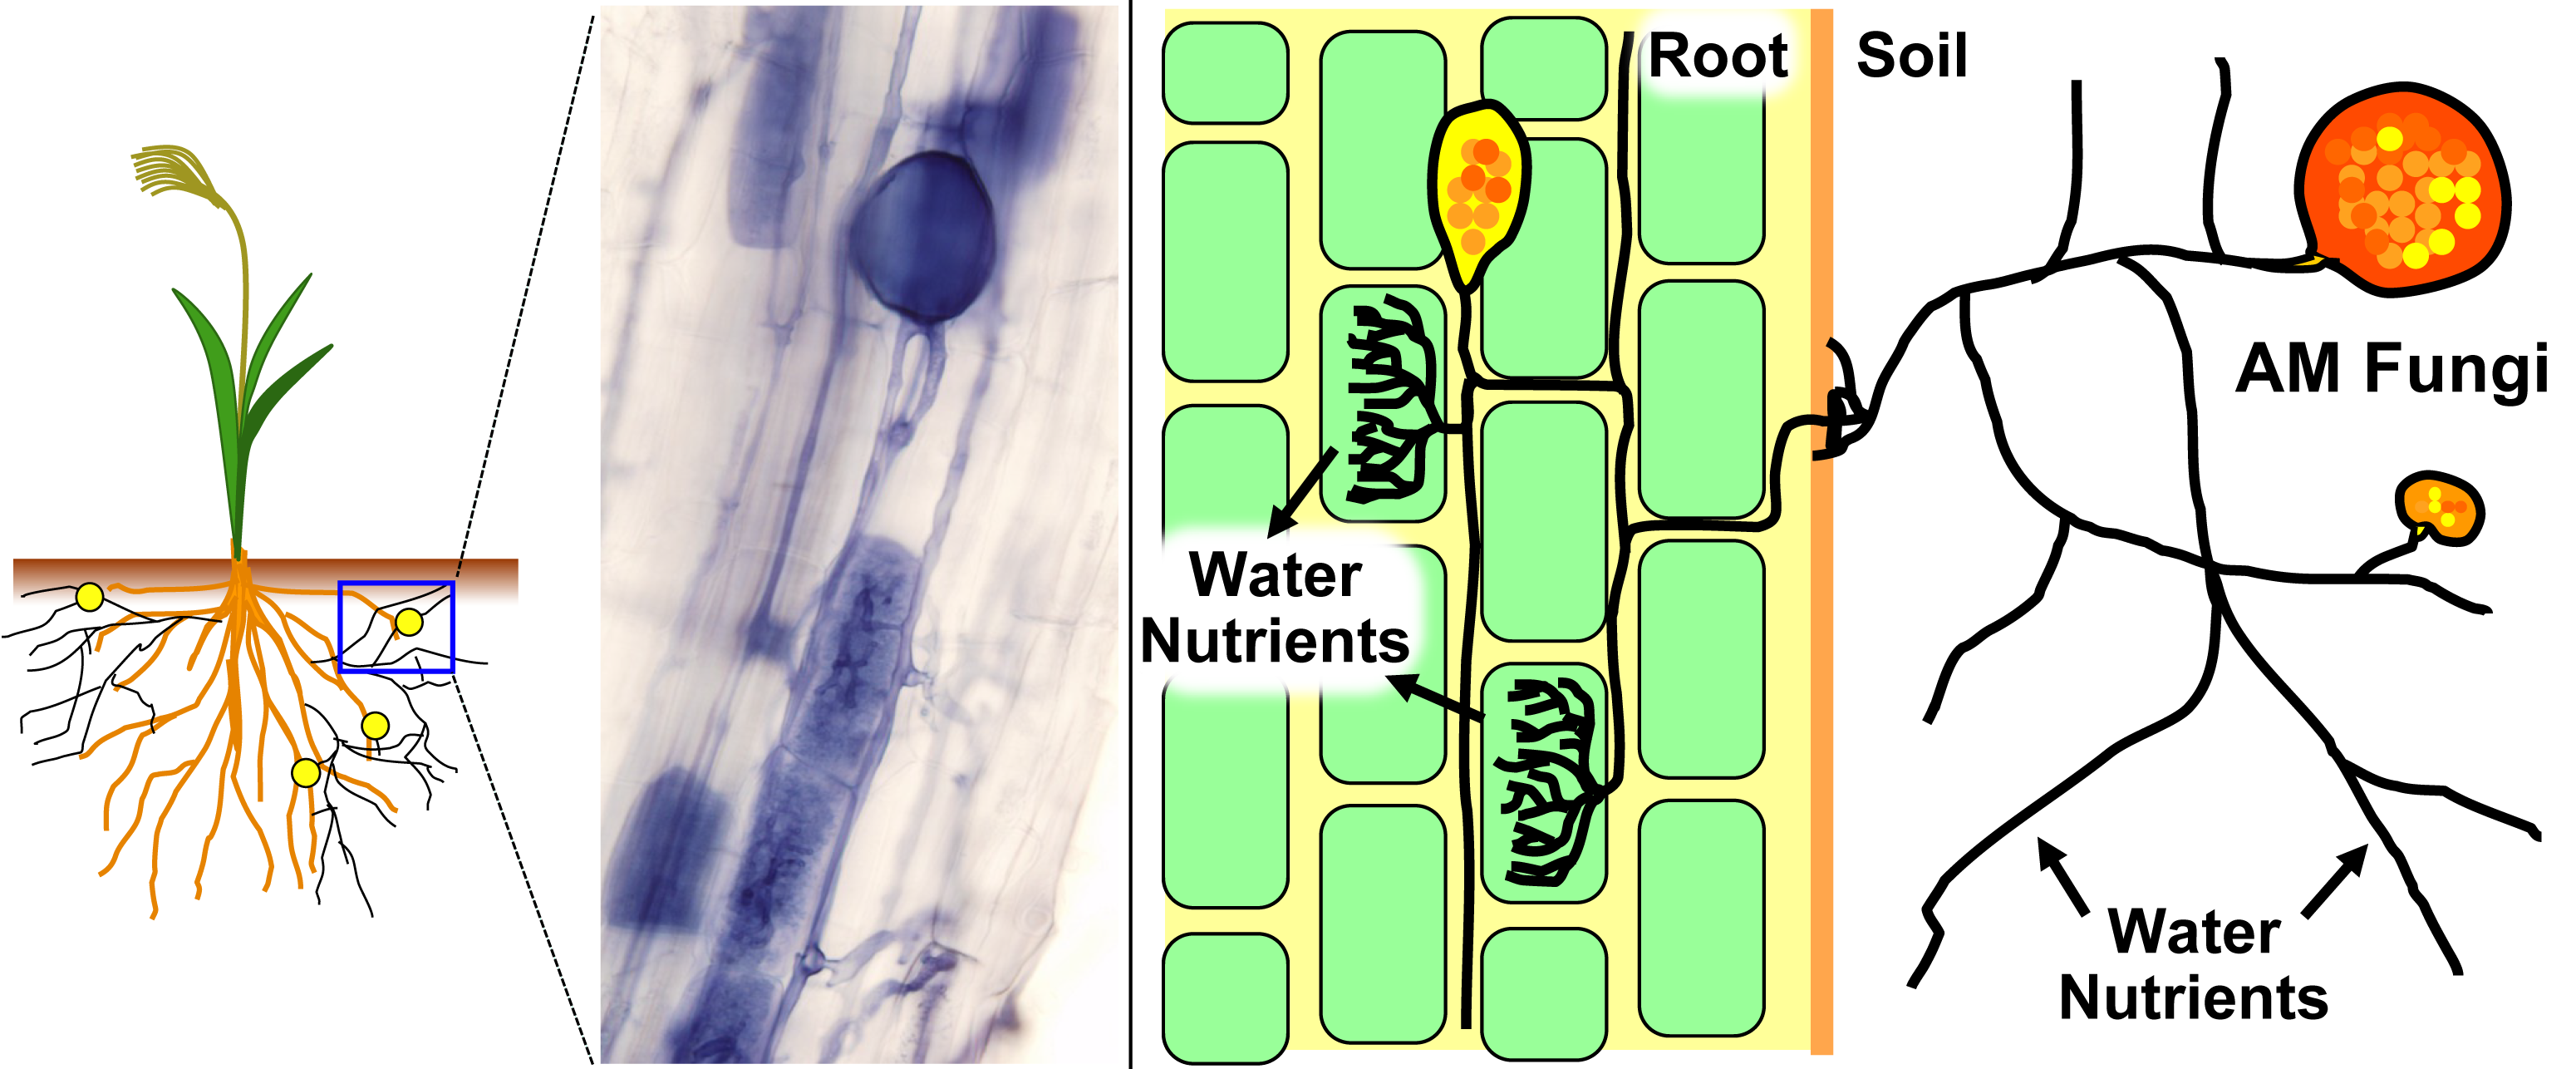 Arbuscular mycorrhizal (AM) fungi in the Glomeromycotina colonize plant roots (left, micrograph) and deliver water and nutrients from soil (right). (Tatsuhiro Ezawa).